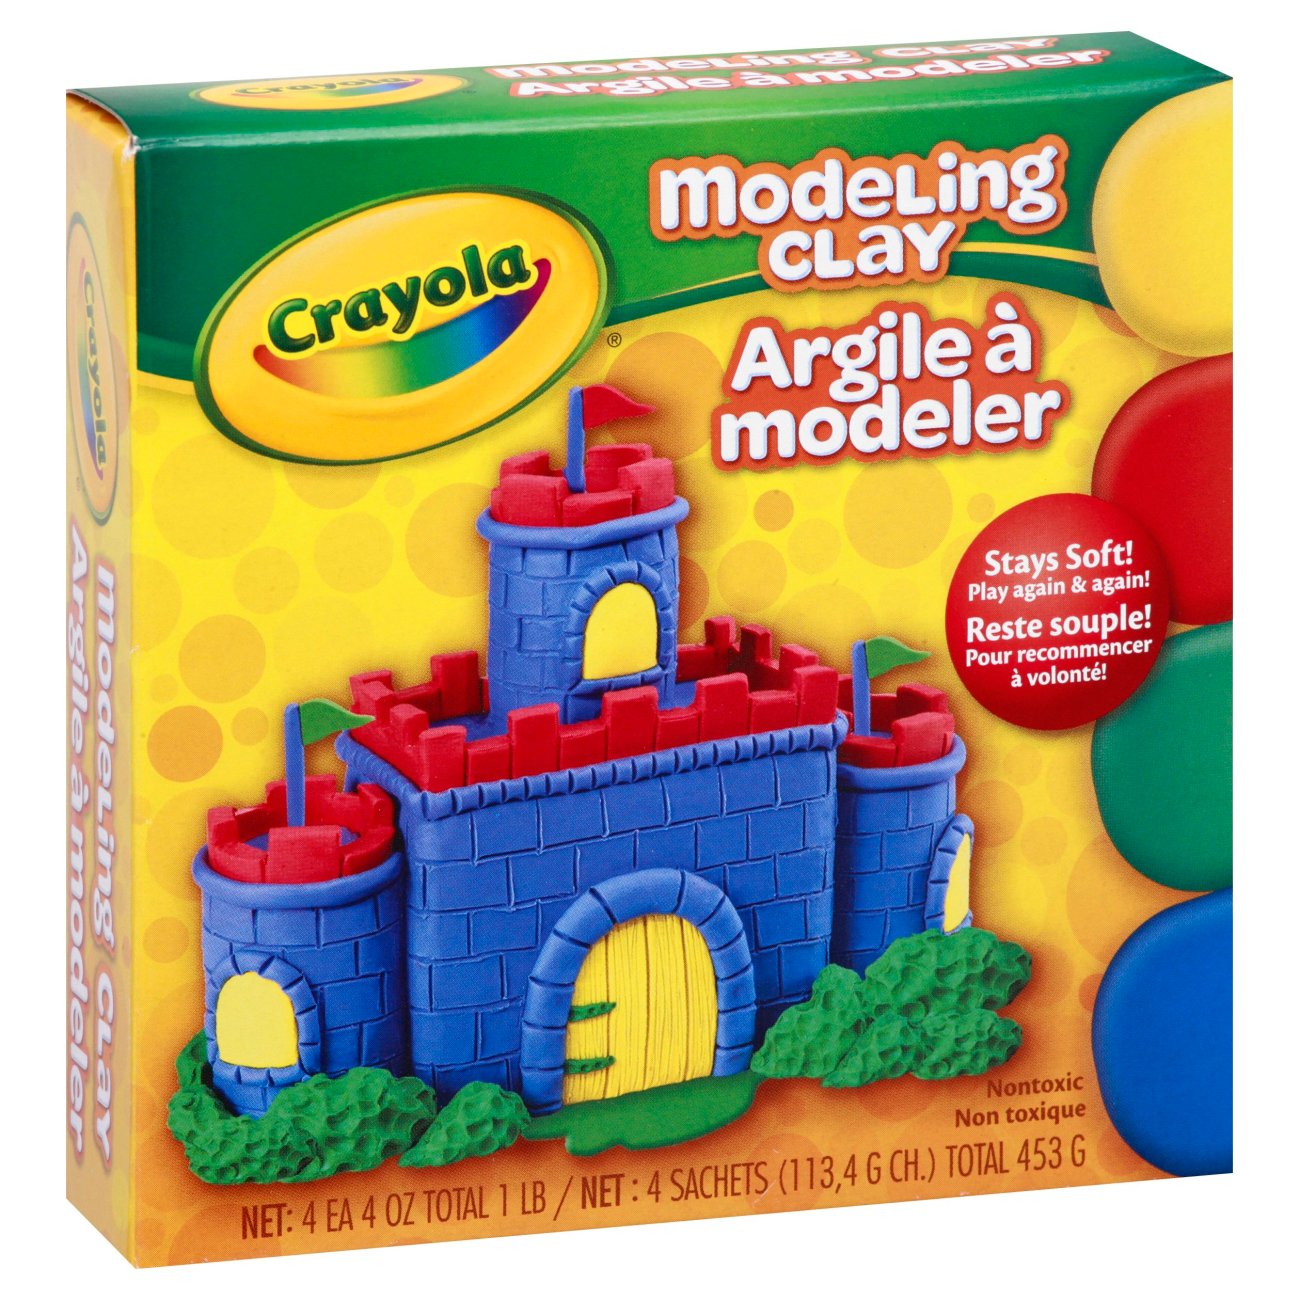 where can i get modeling clay